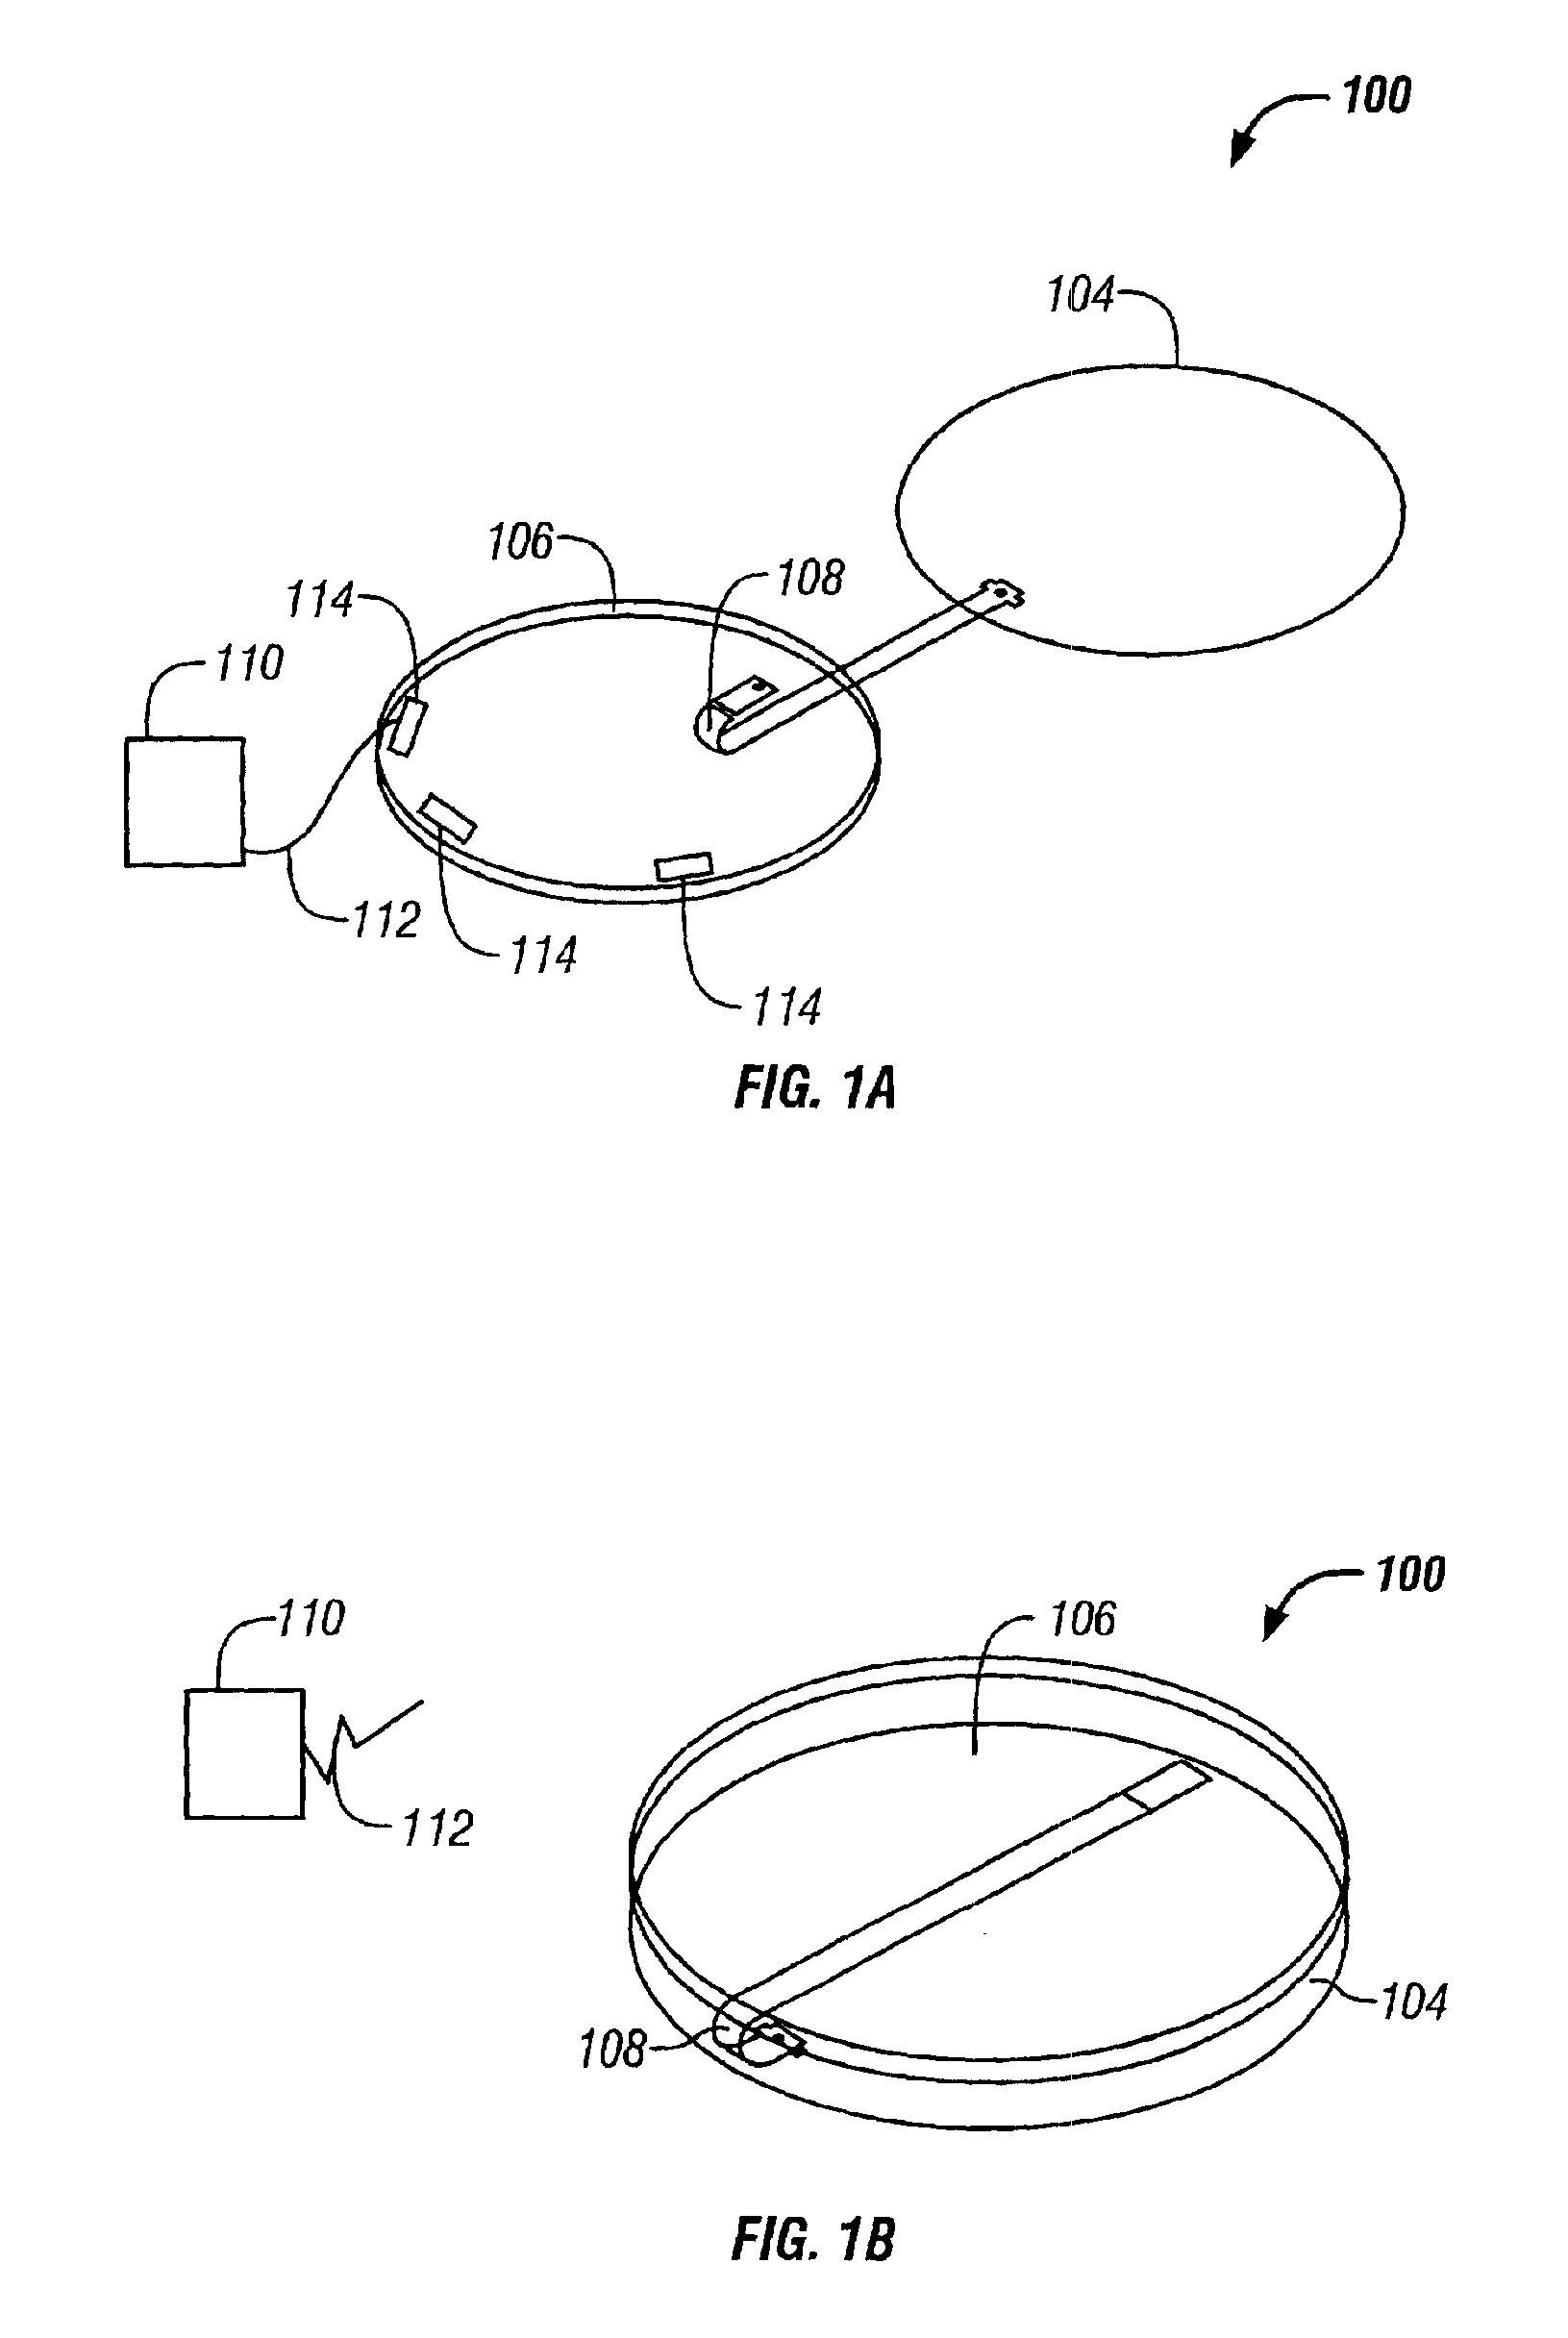 Process condition sensing wafer and data analysis system